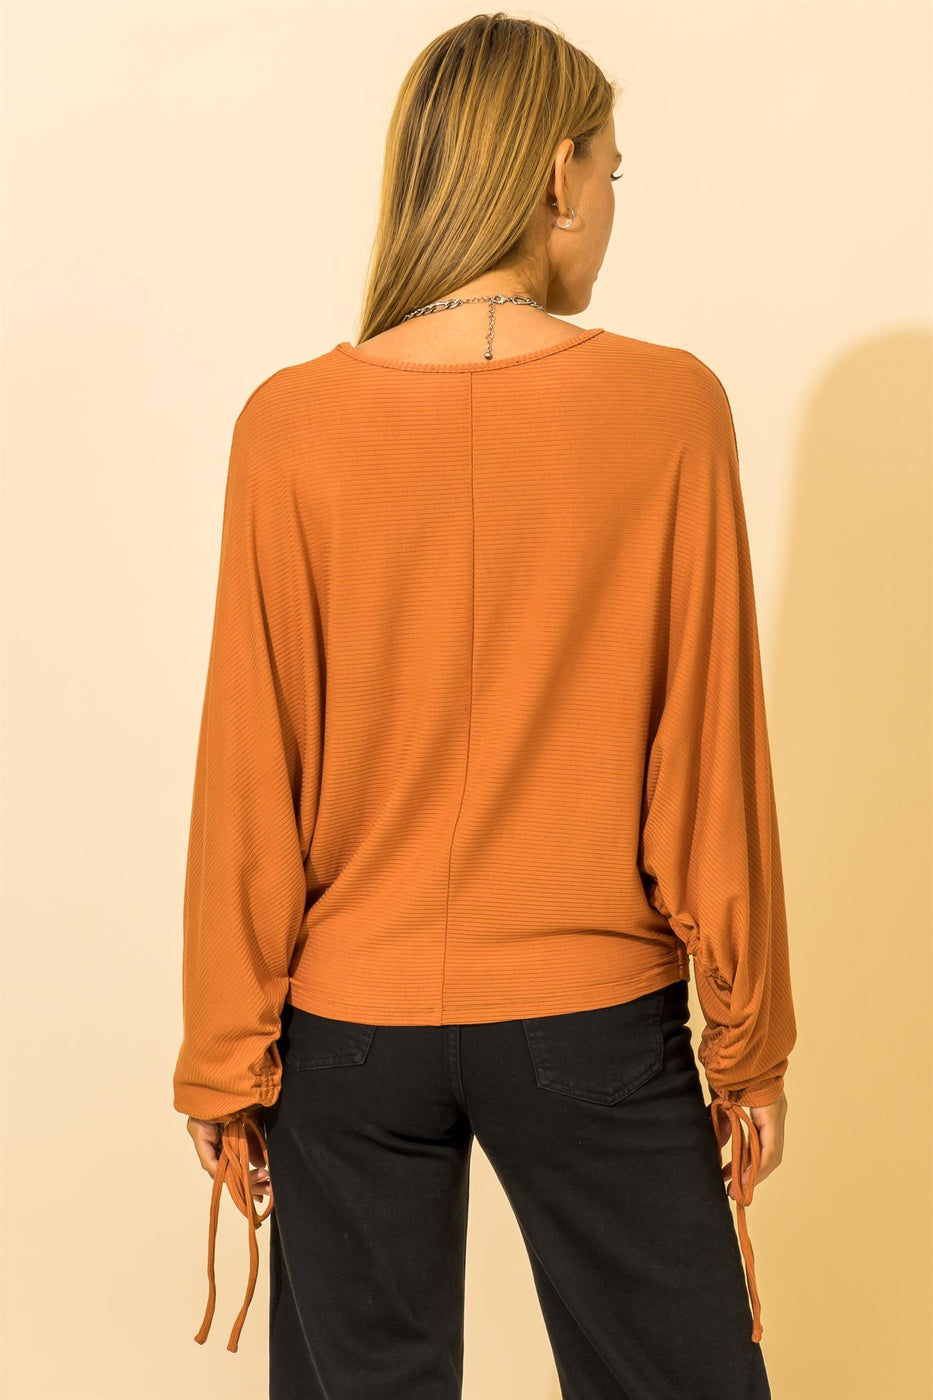 Top, Long-Sleeves w/wrist ties, Relaxed Fit, Rust